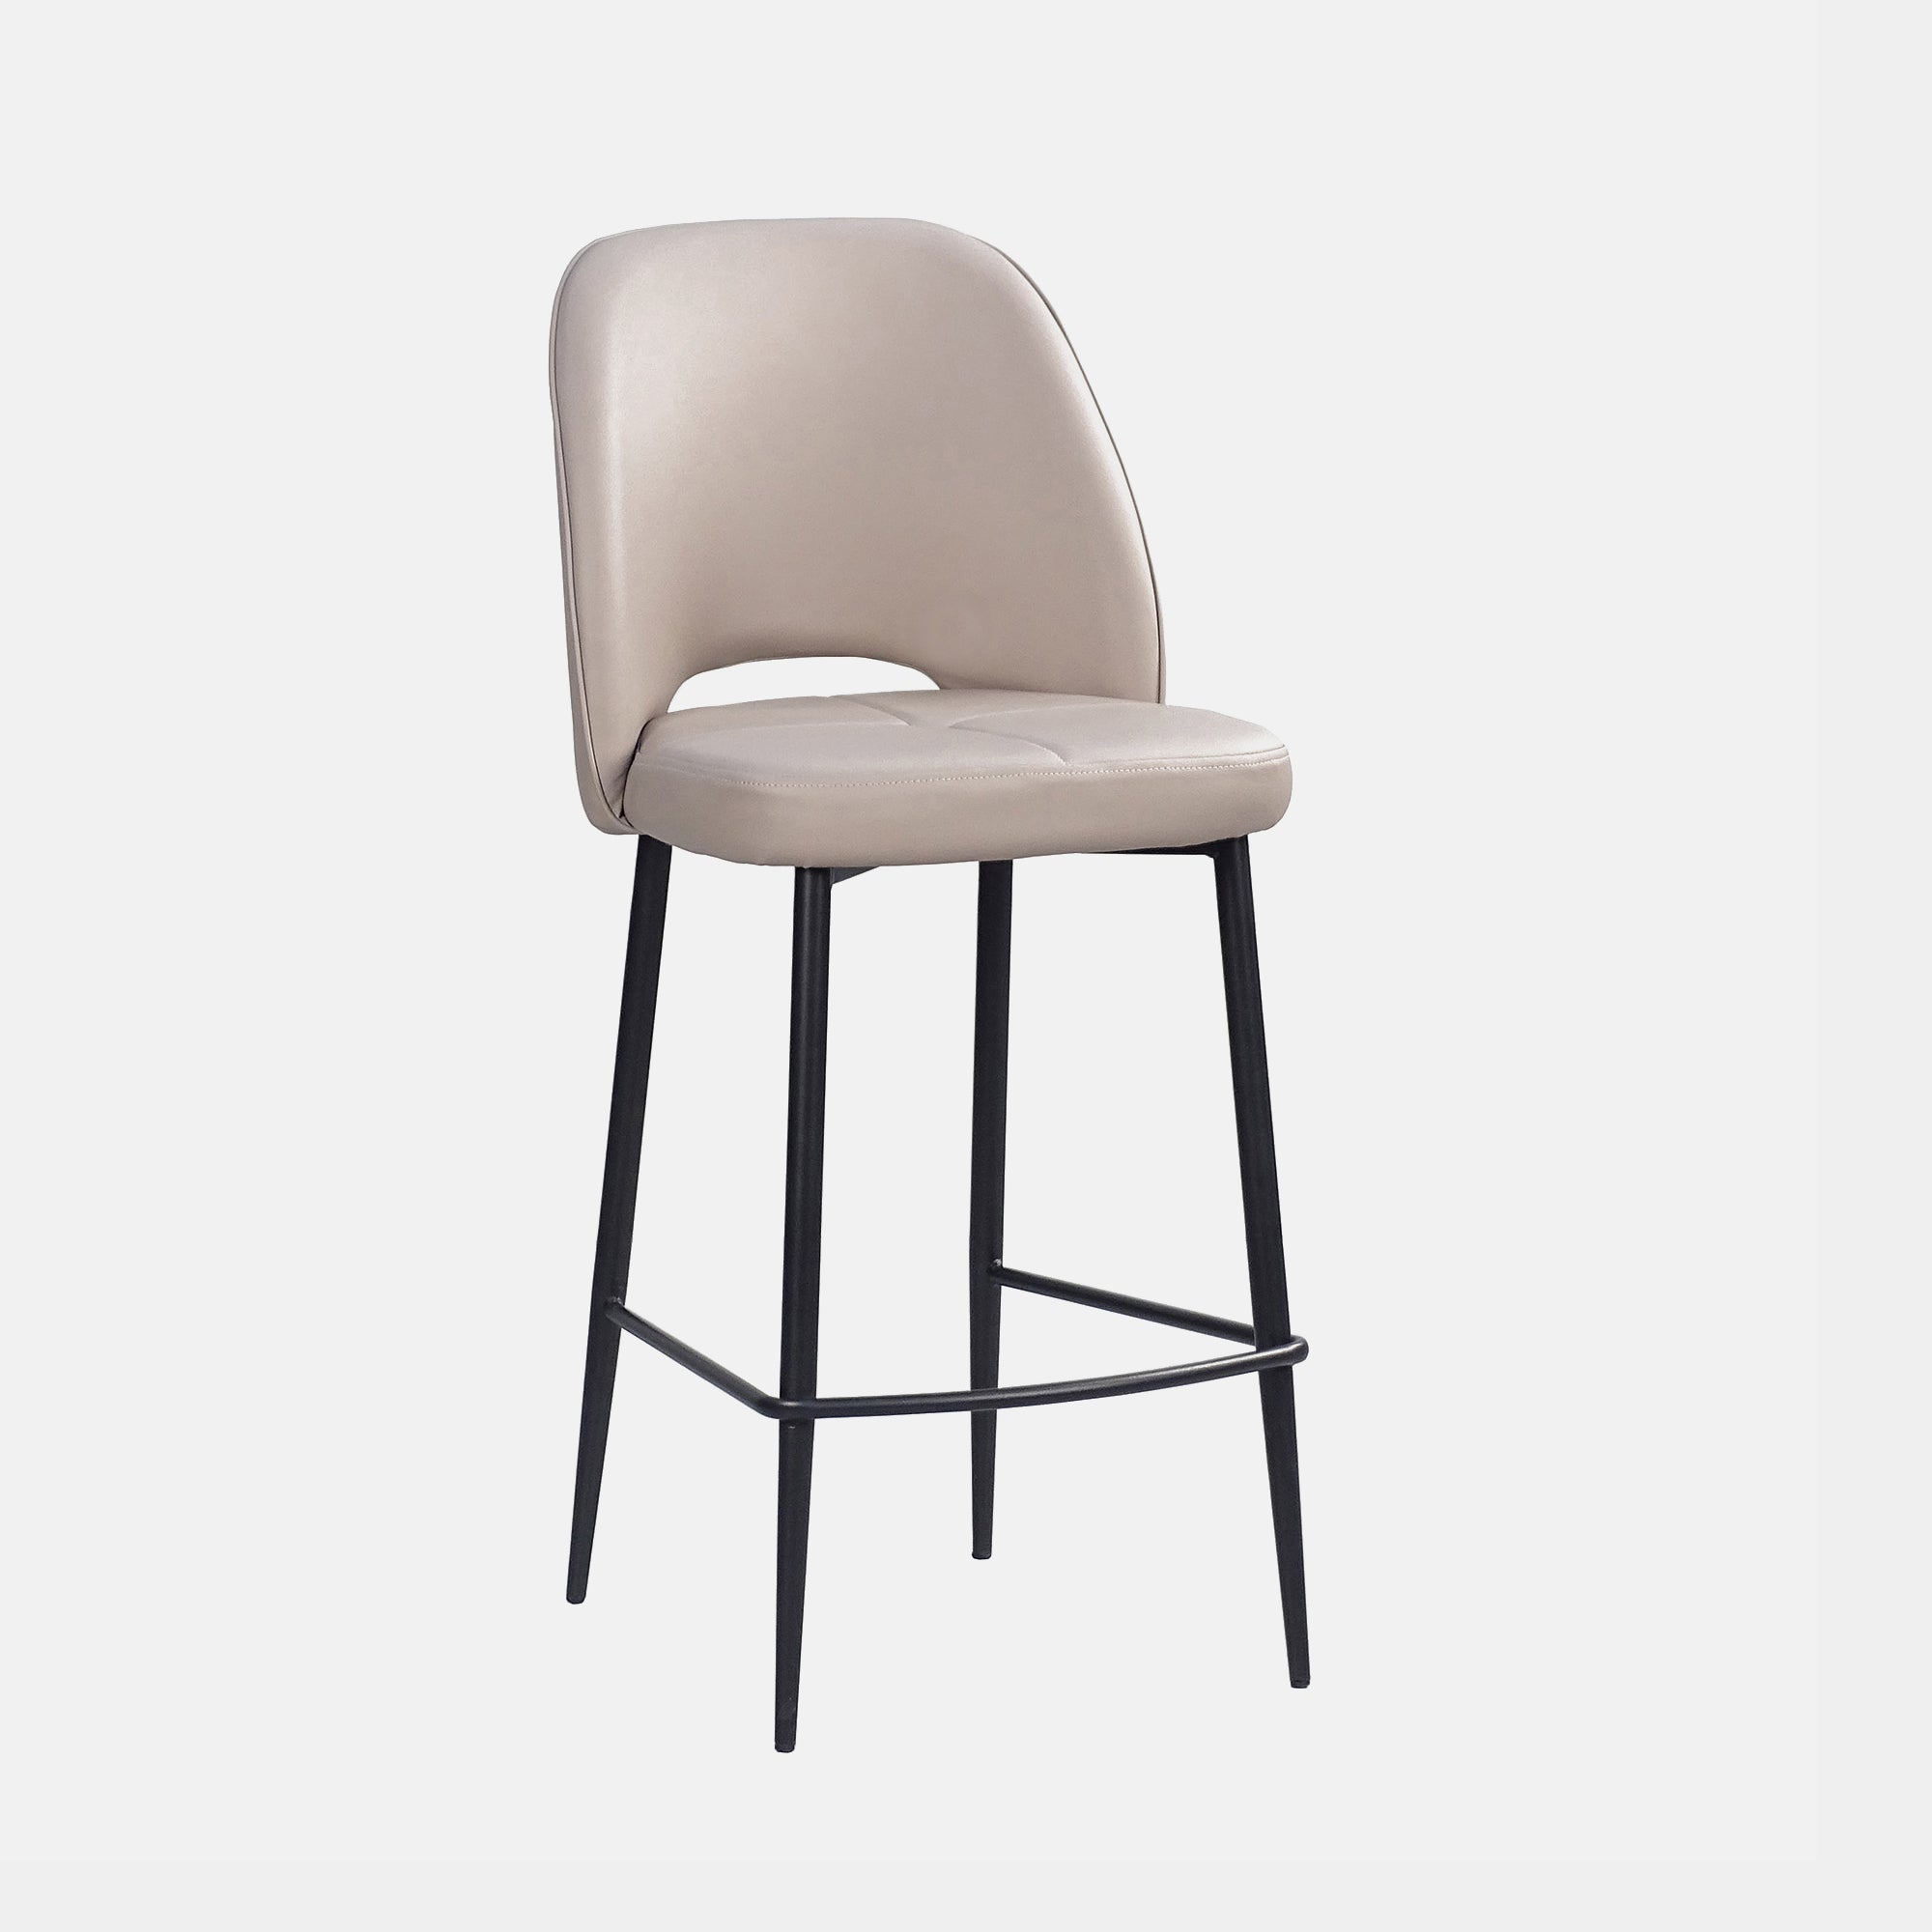 Finley - Bar Stool I n PU Leather Taupe